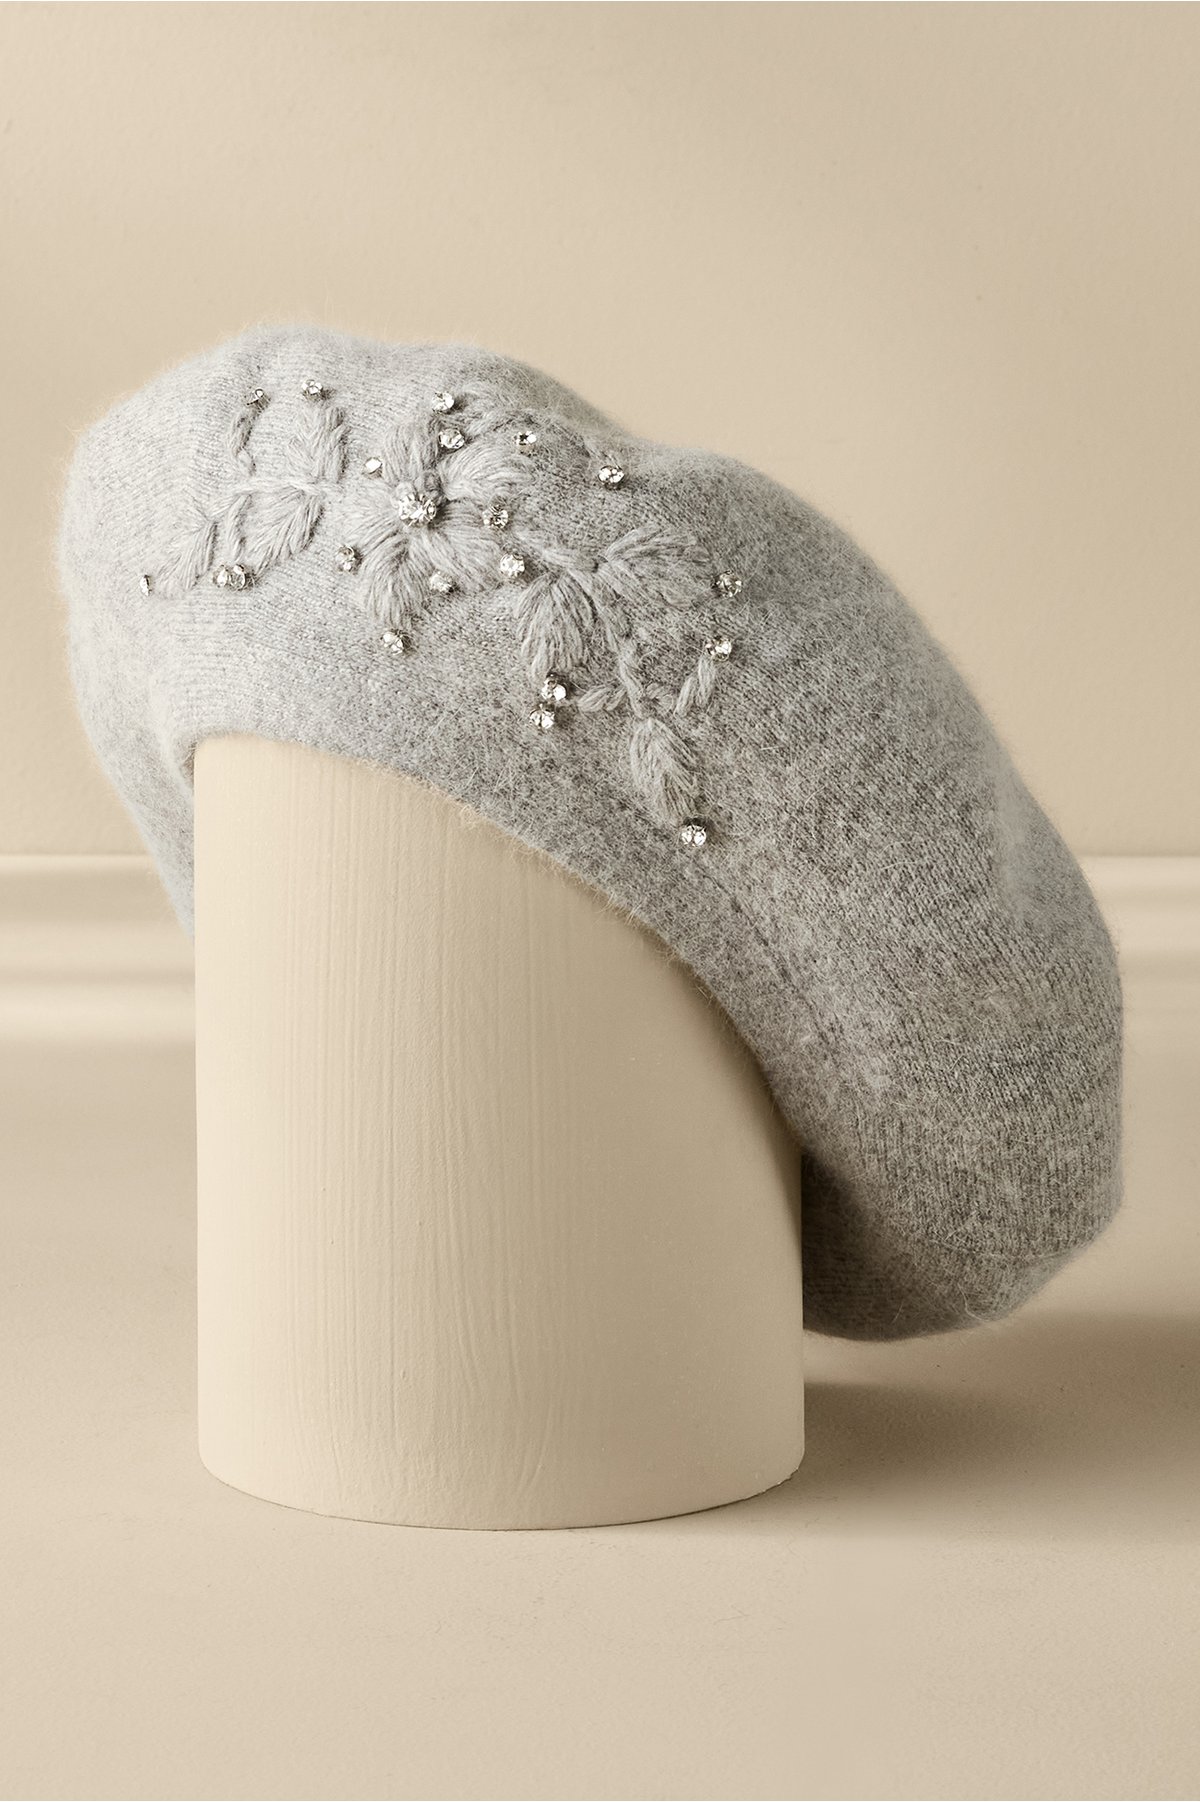 Cheri Embellished Beret, Shoes by Soft Surroundings, in Grey